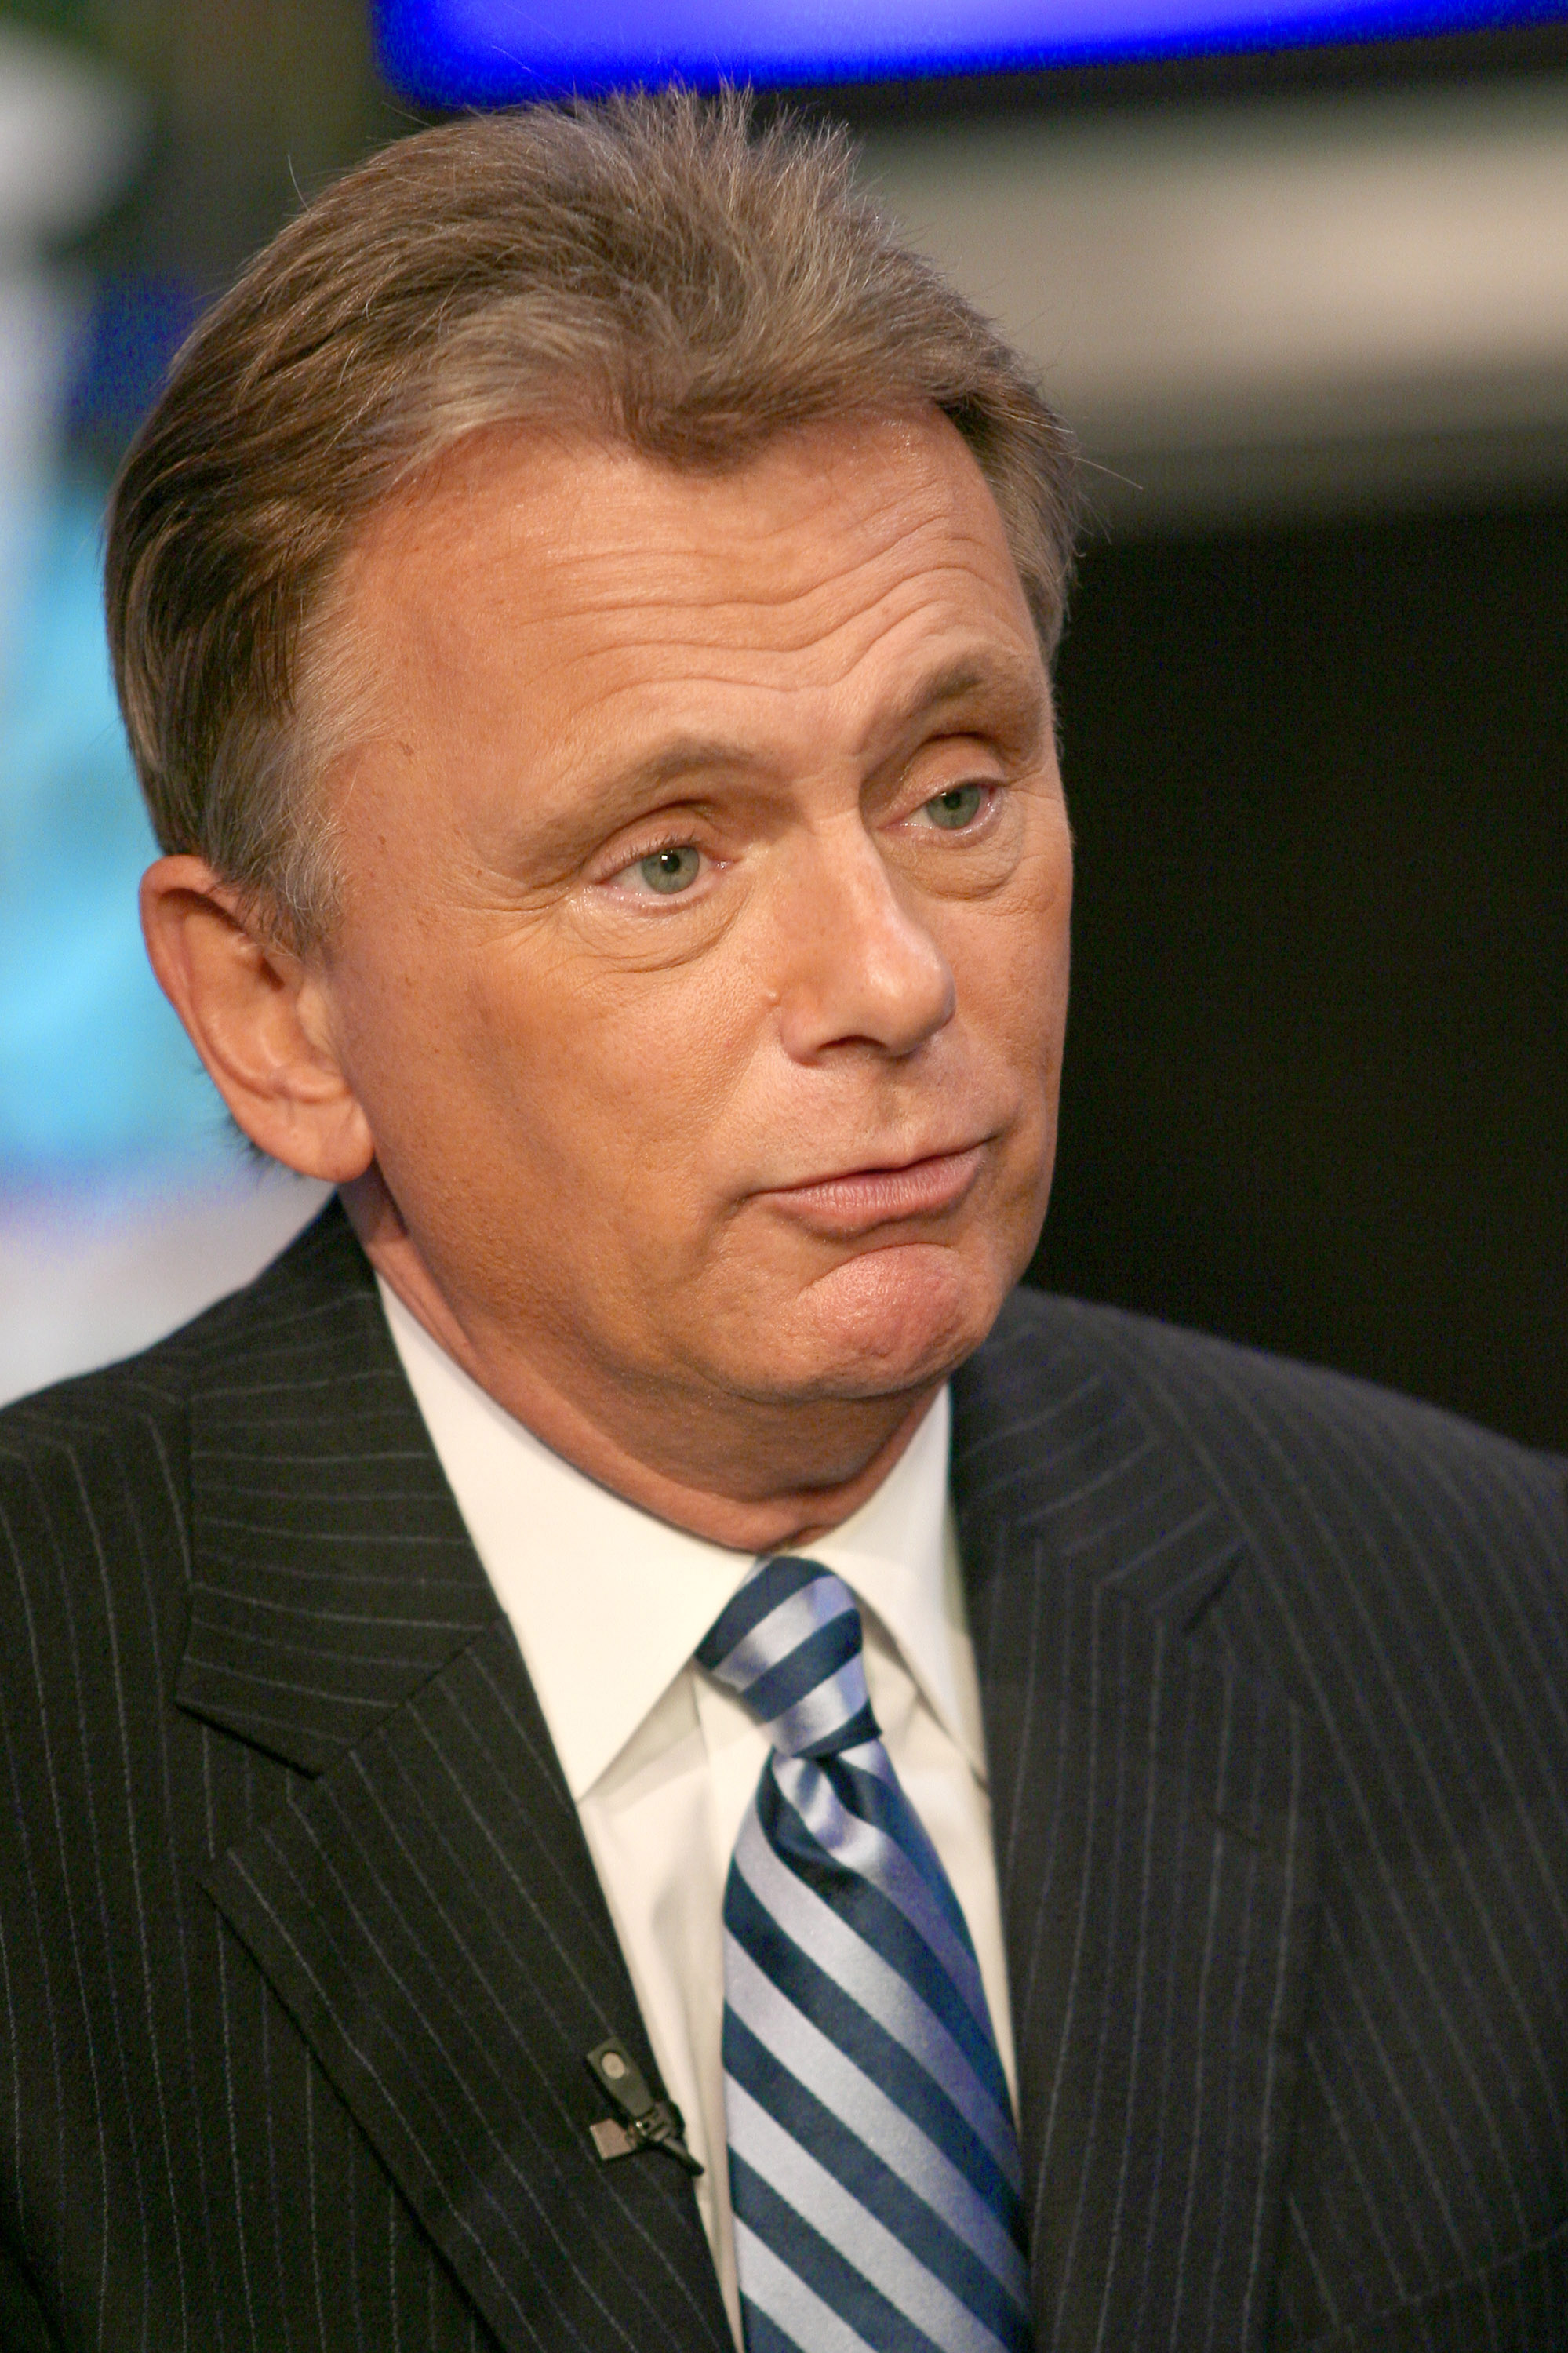 Pat Sajak in Culver City, California, United States | Source: Getty Images